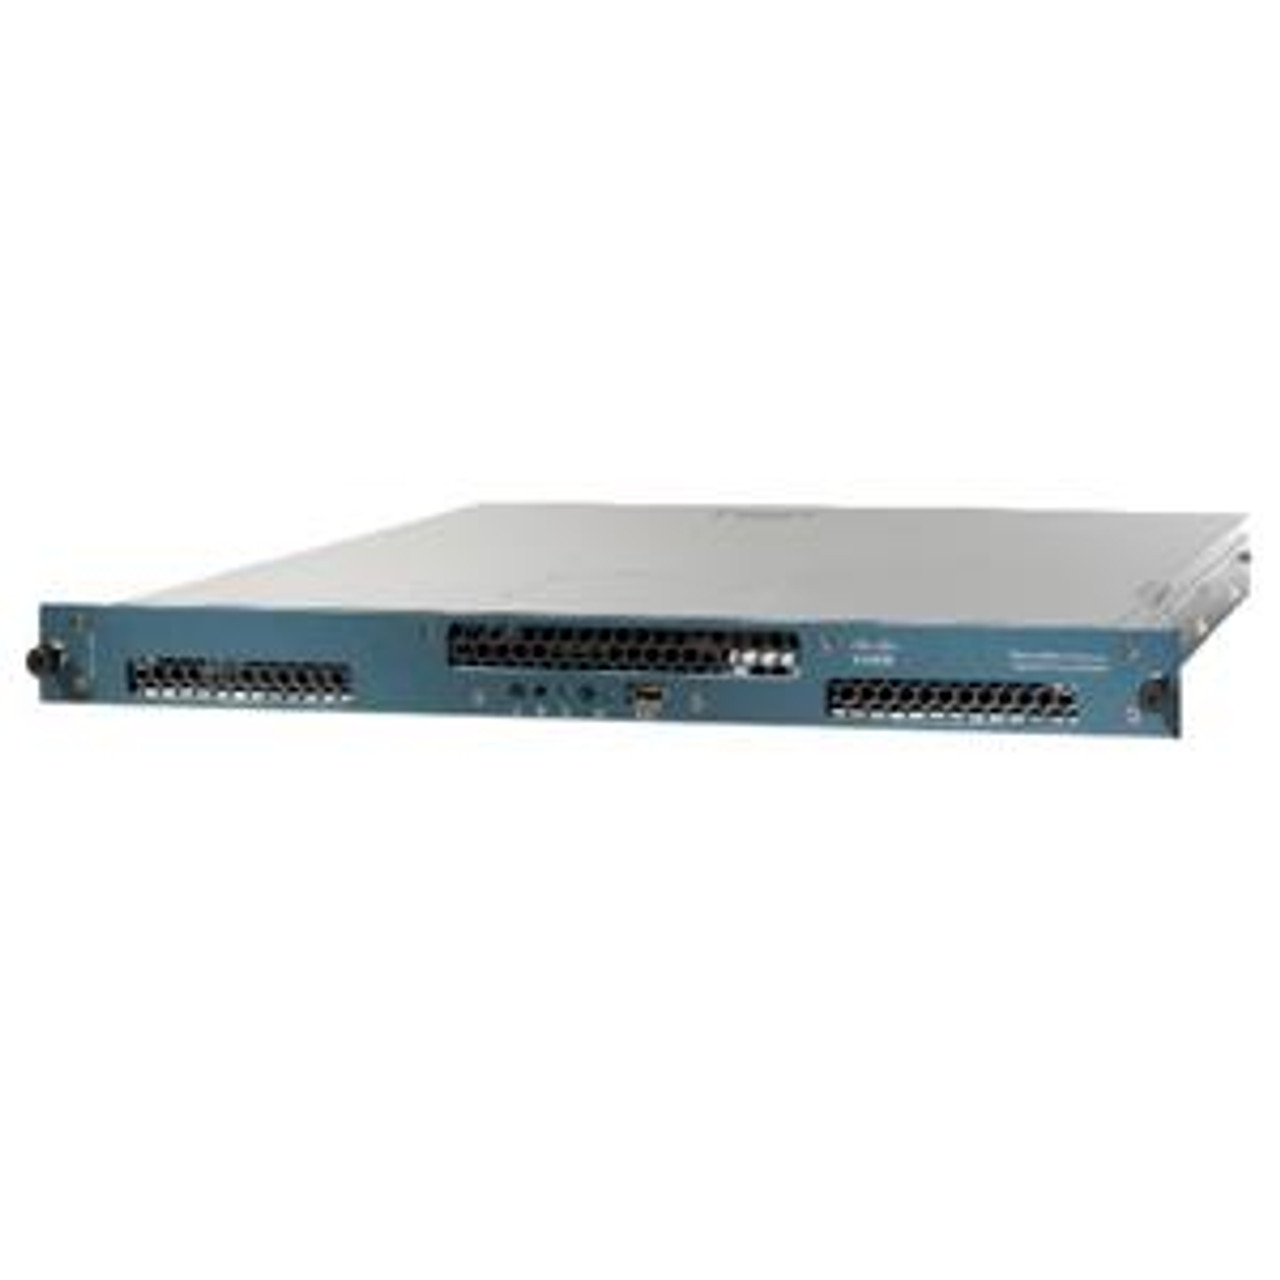 ACE-4710-4F-K9 Cisco Ace 4710 H/w-4GBps-7500 Ssl-2GBps Comp-5vc-appacl (Refurbished)